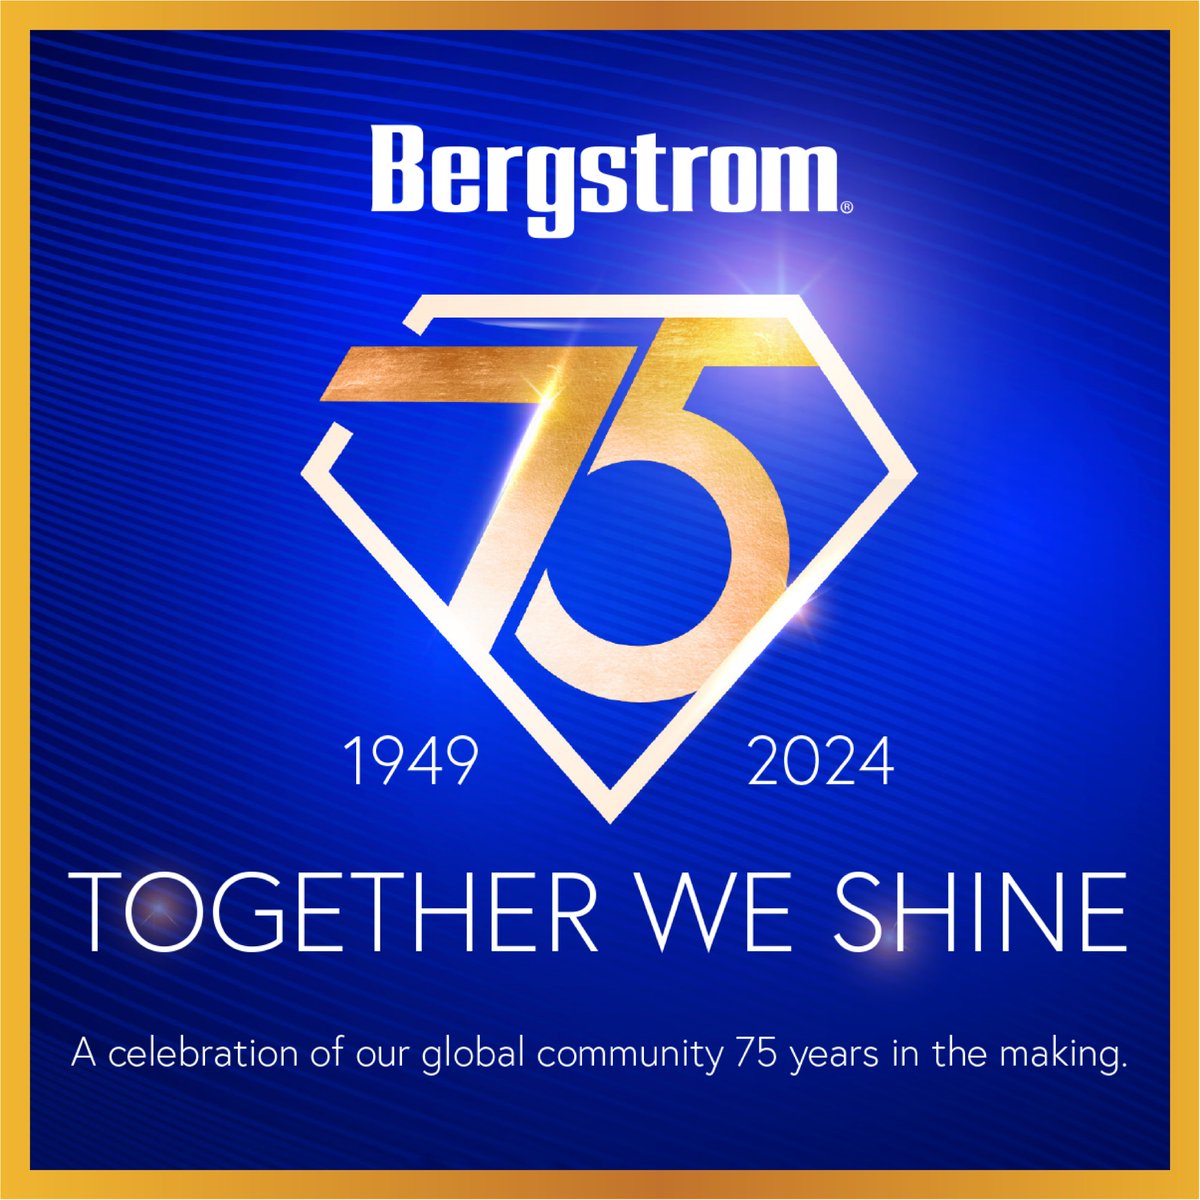 Celebrating 75 years of keeping things cool (and sustainable)!  Bergstrom Inc. is proud of our legacy of innovation, from HVAC systems to no-idle solutions and developing zero-emission technologies for the future. #Bergstrom75 #SustainabilityLeaders